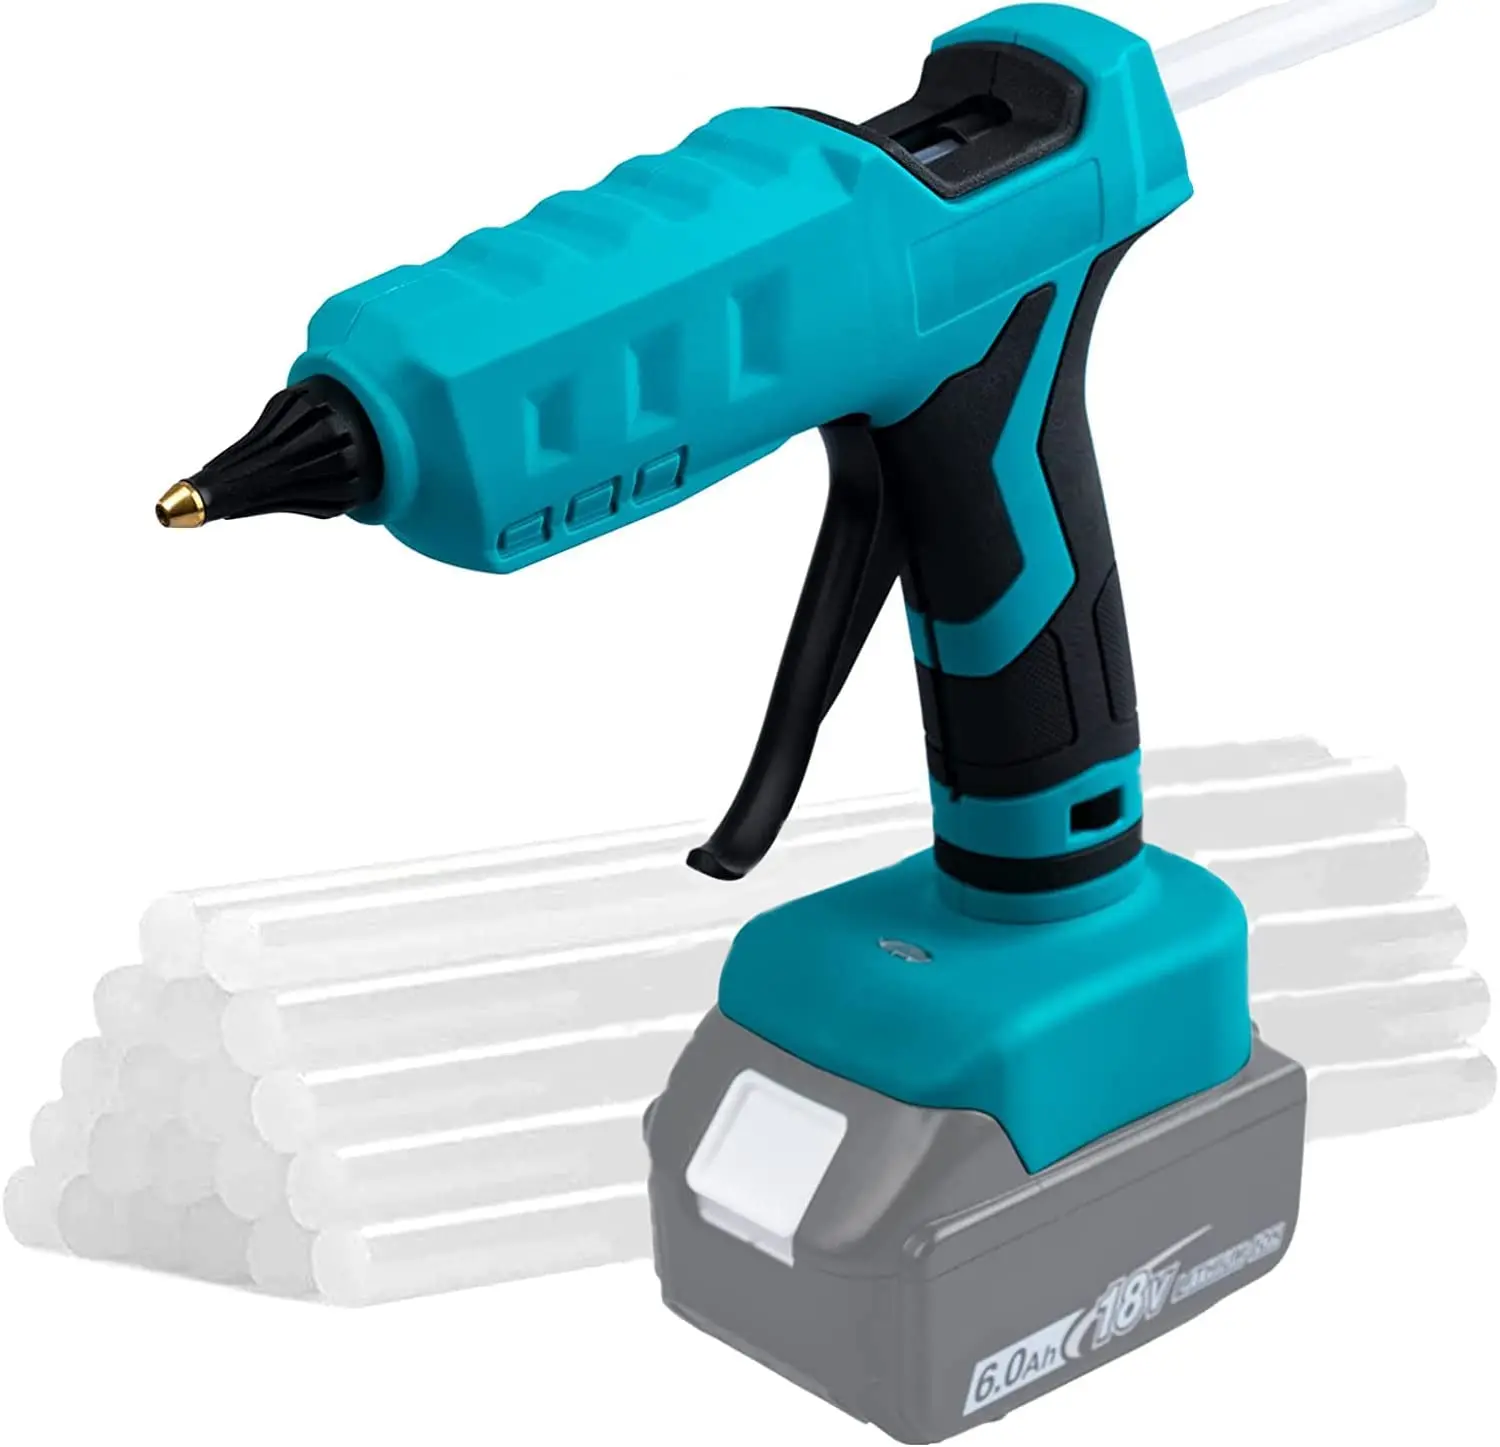 100W Cordless Hot Glue Gun for Makita 18V BL1830 BL1840 LXT Battery use 11mm Glue Sticks DIY Electric Heat Repair Tool Christmas 1000pcs 1s 18650 li ion battery insulation gasket barley paper battery pack cell insulating glue patch electrode insulated pads